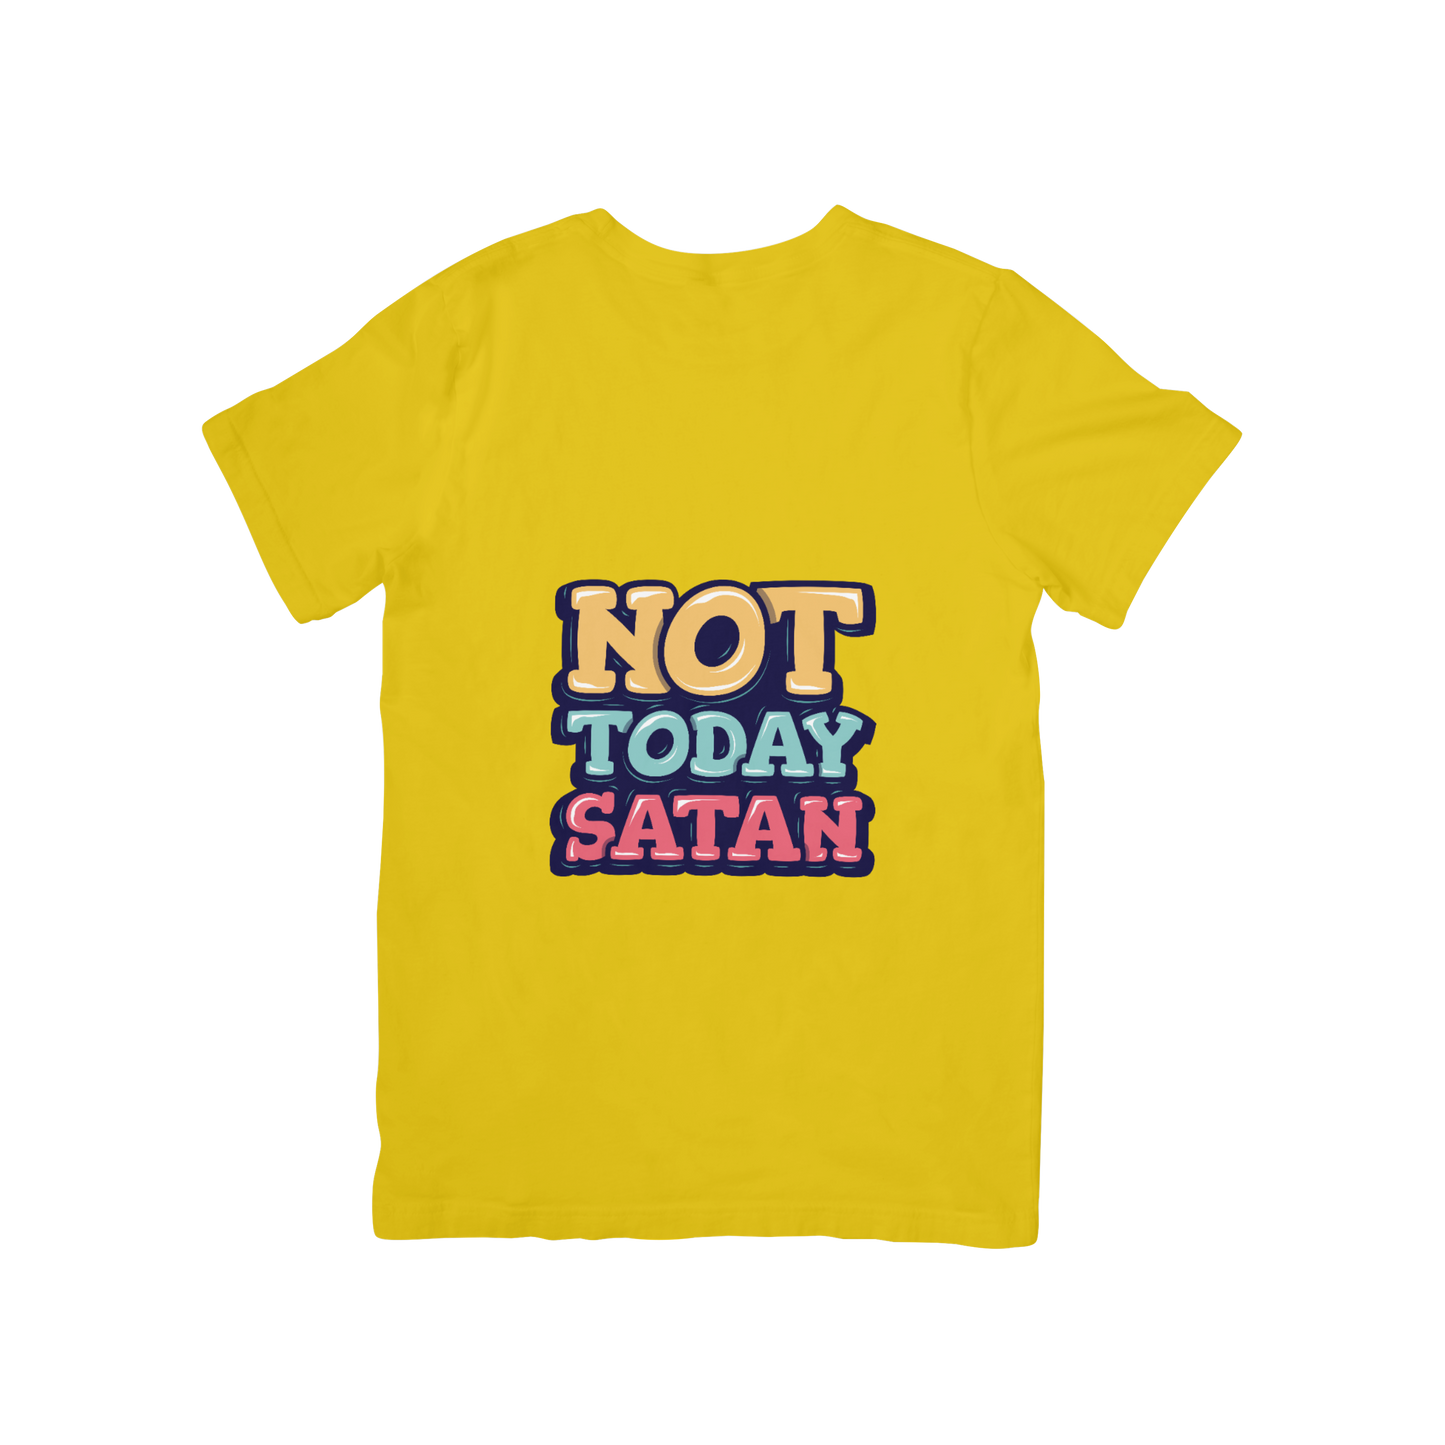 'Not today Satan' Quote T-shirt